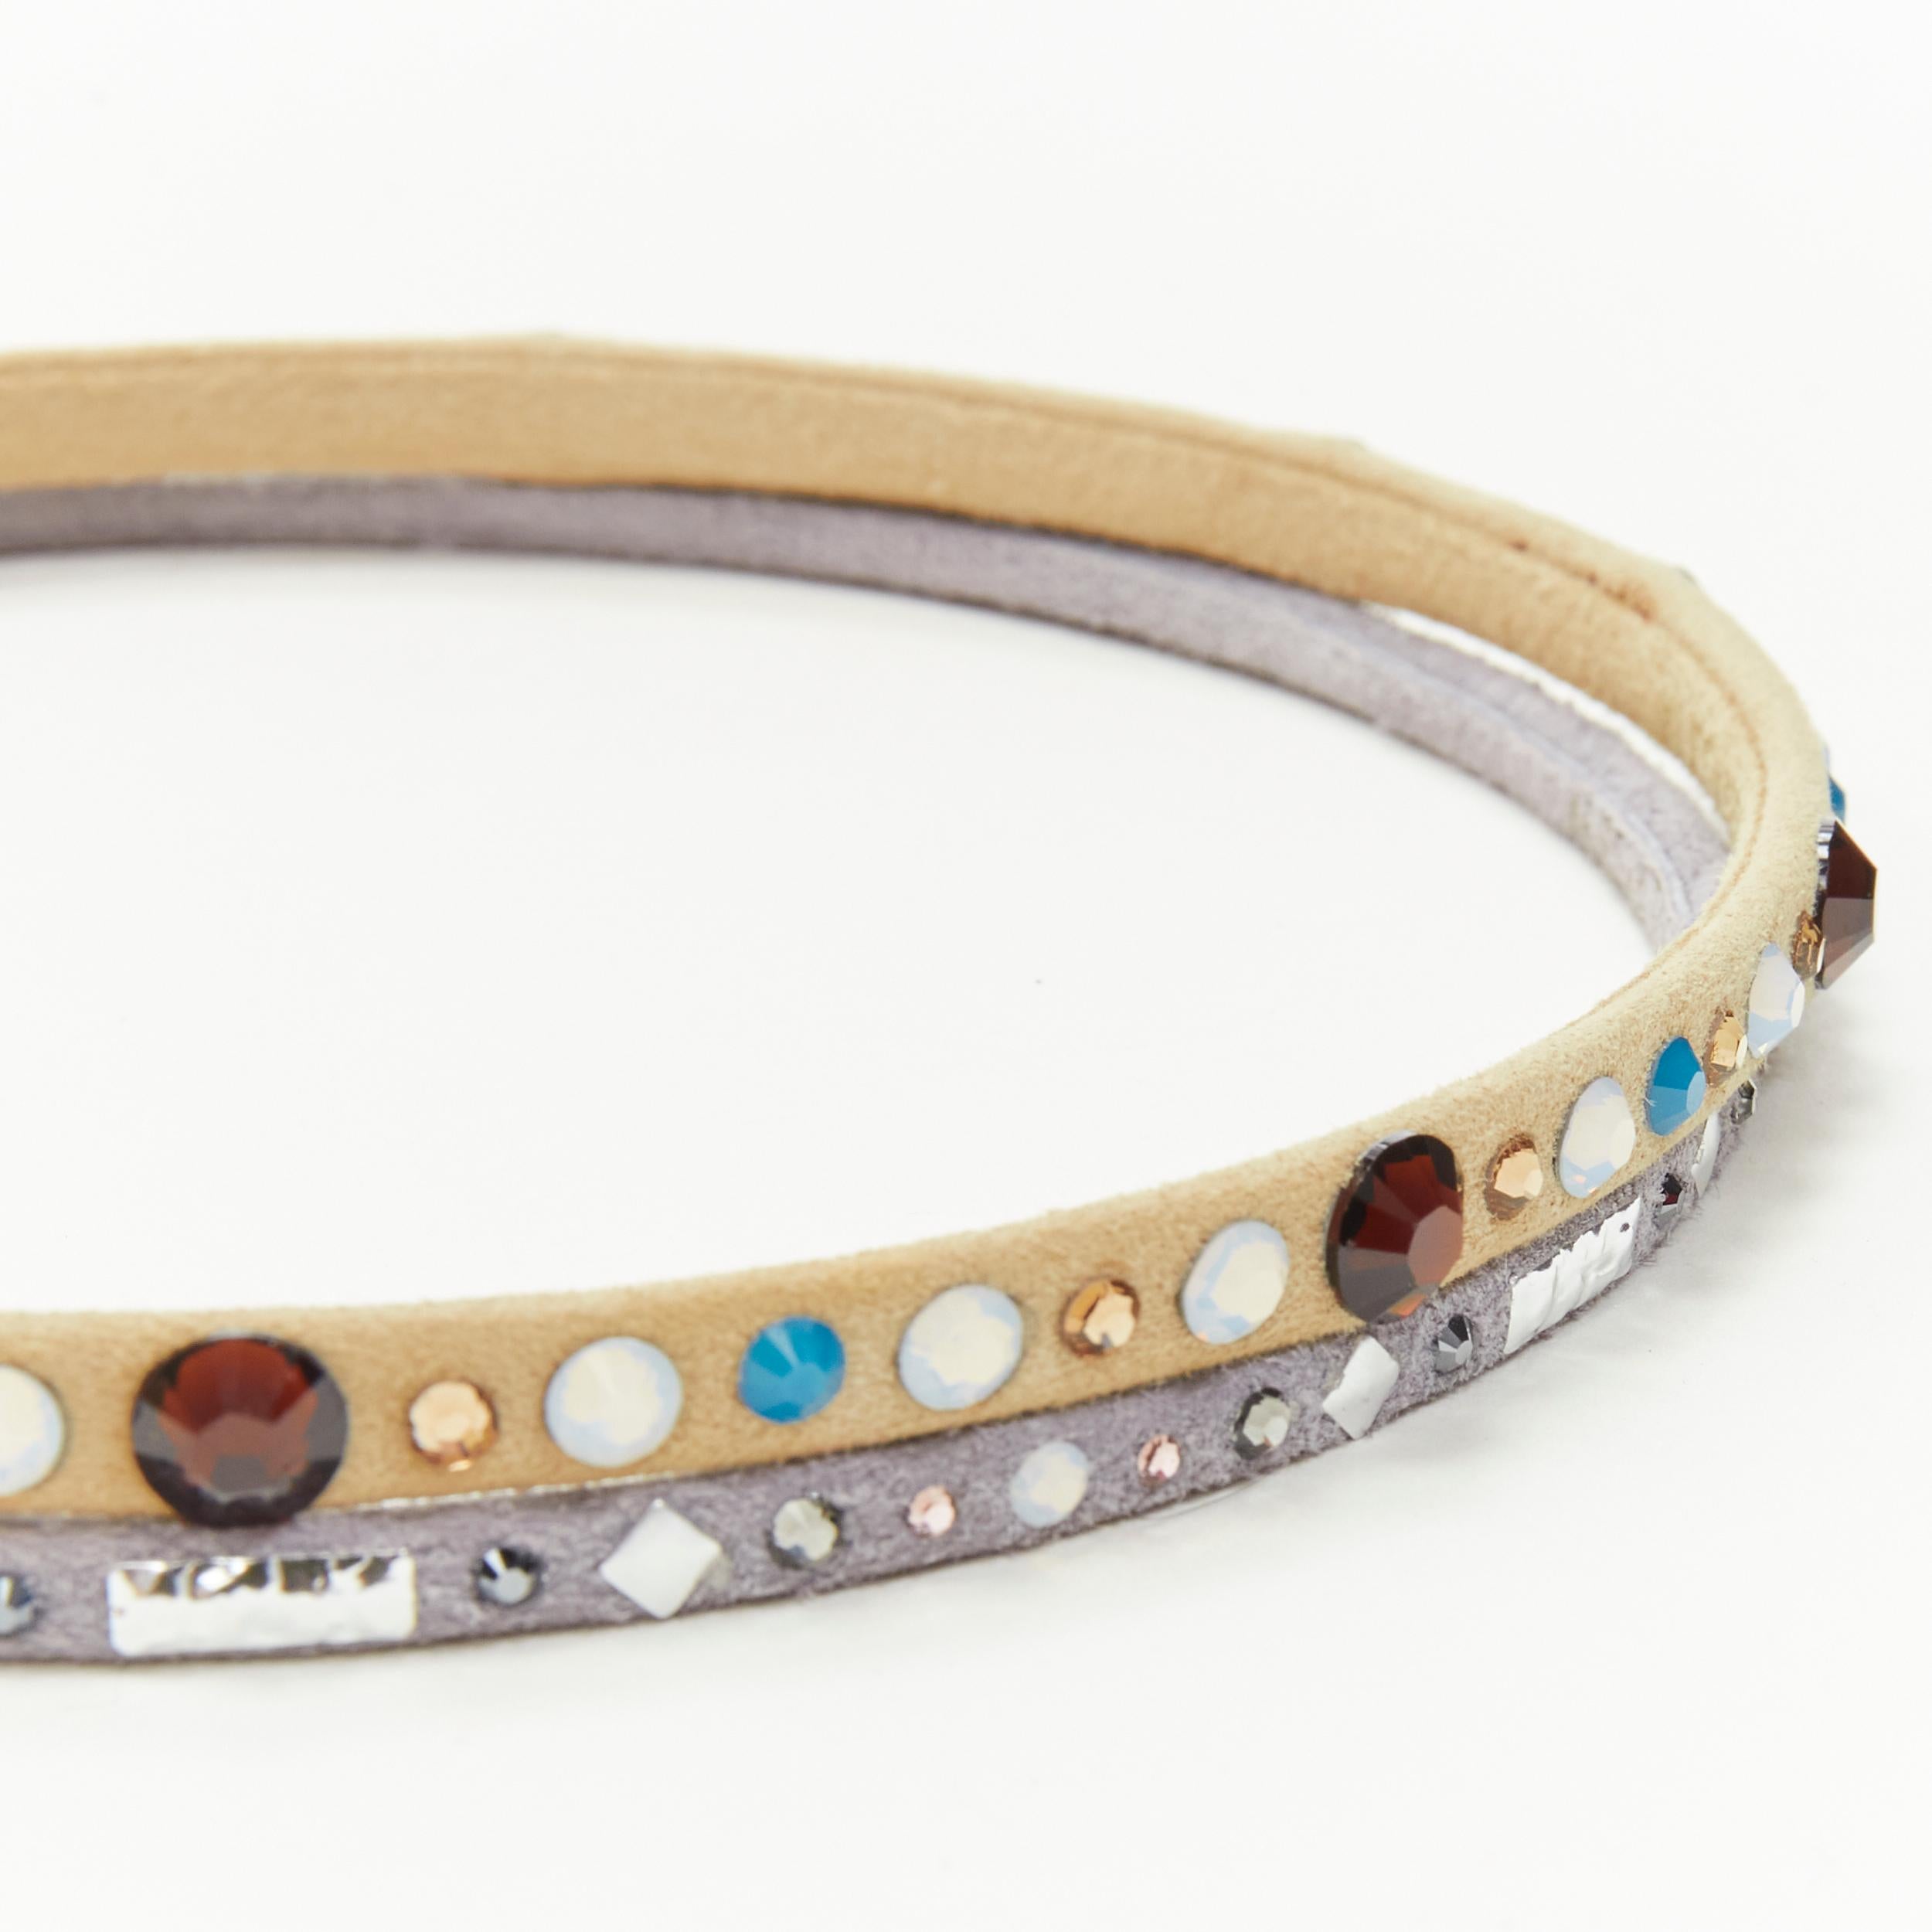 ALEXANDRE ZOUARI beige grey suede colorful rhinestone skinny headband X2
Reference: ANWU/A00208
Brand: Alexandre Zouari
Designer: Alexandre Zouari
Material: Suede
Color: Beige, Grey
Pattern: Solid
Closure: Pull On
Lining: Suede
Extra Details: Can be